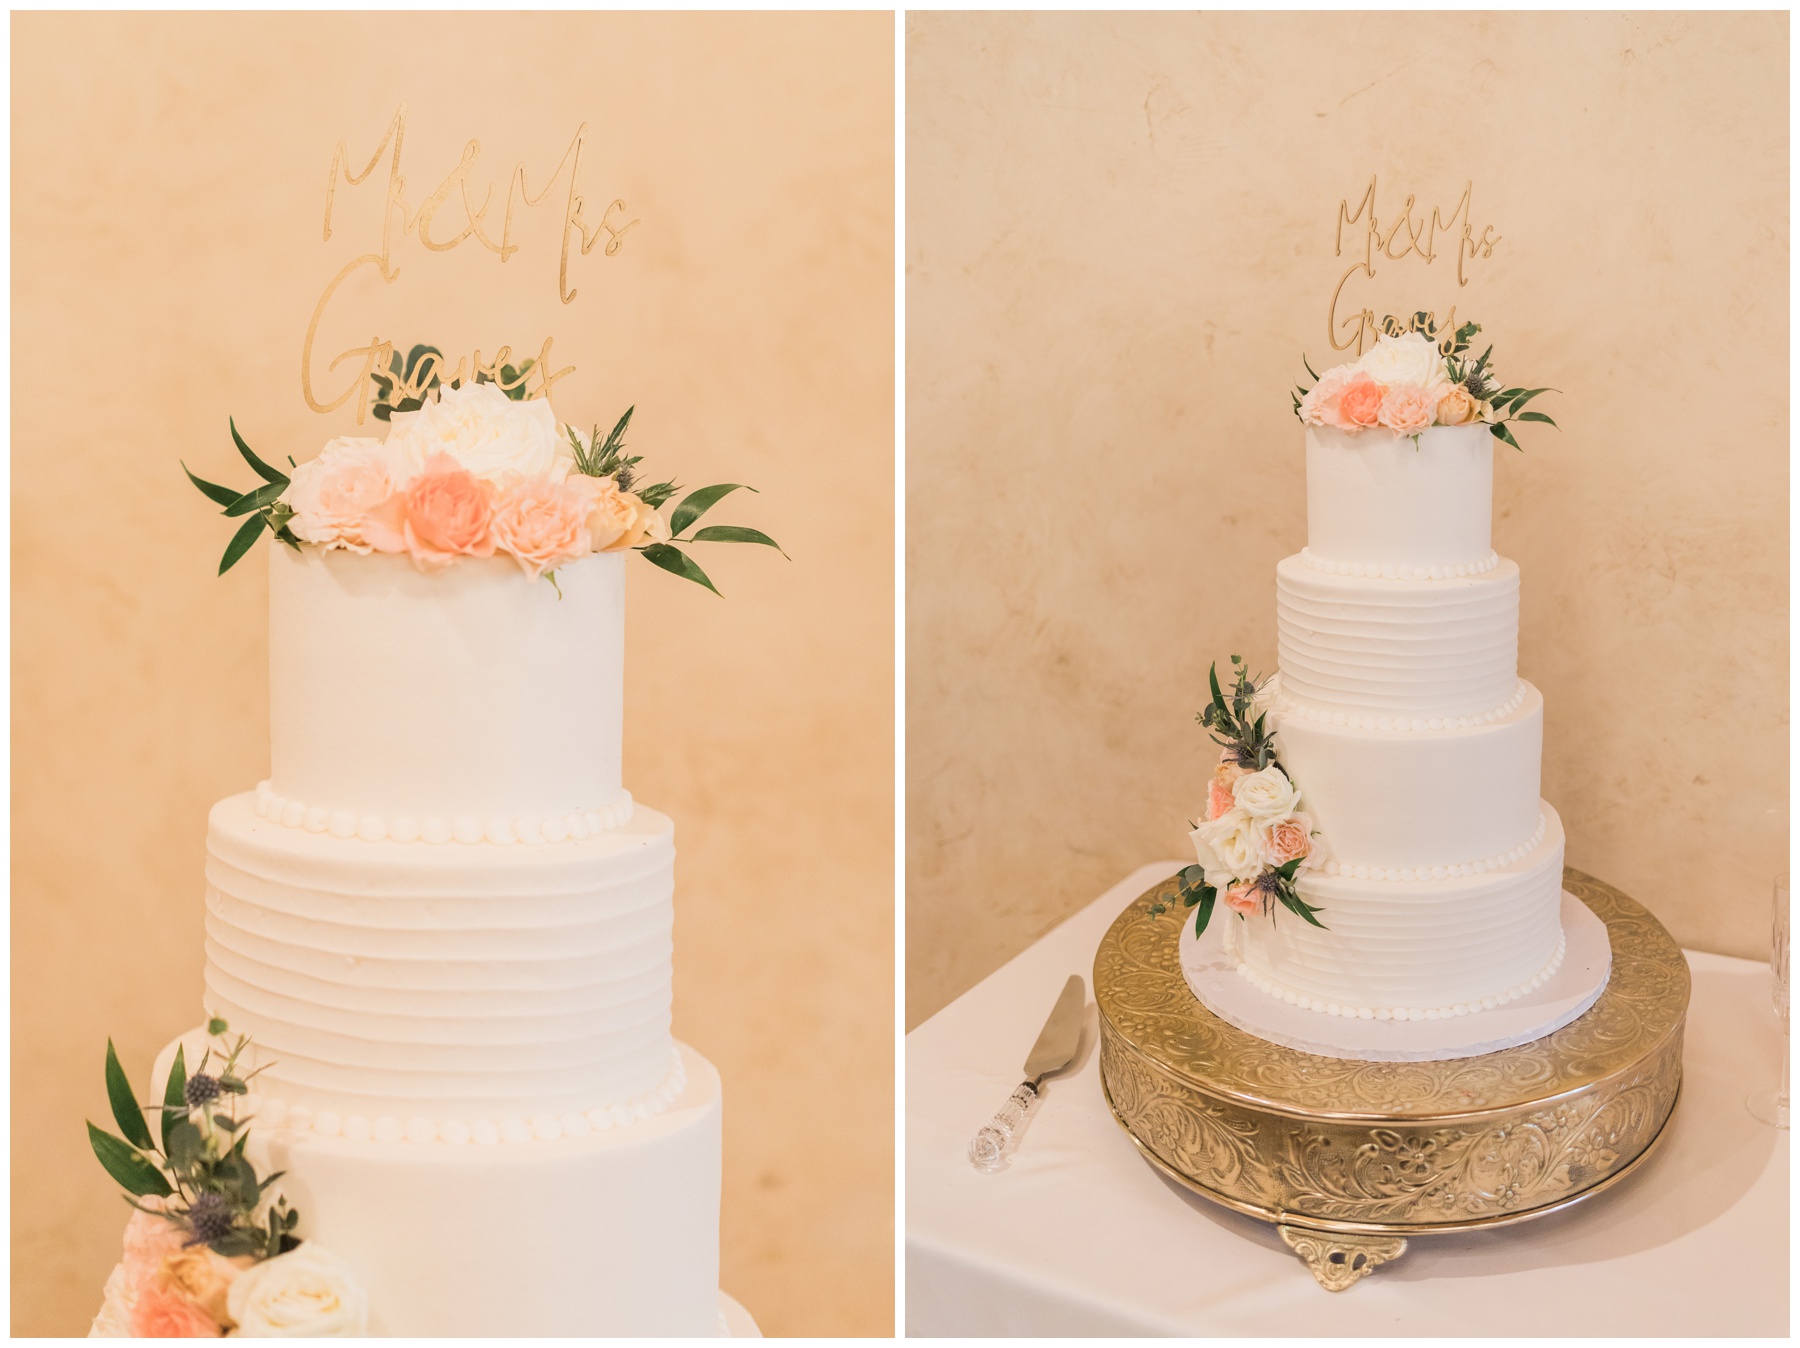 Ribbed buttercream wedding cake with roses and a gold custom cake topper